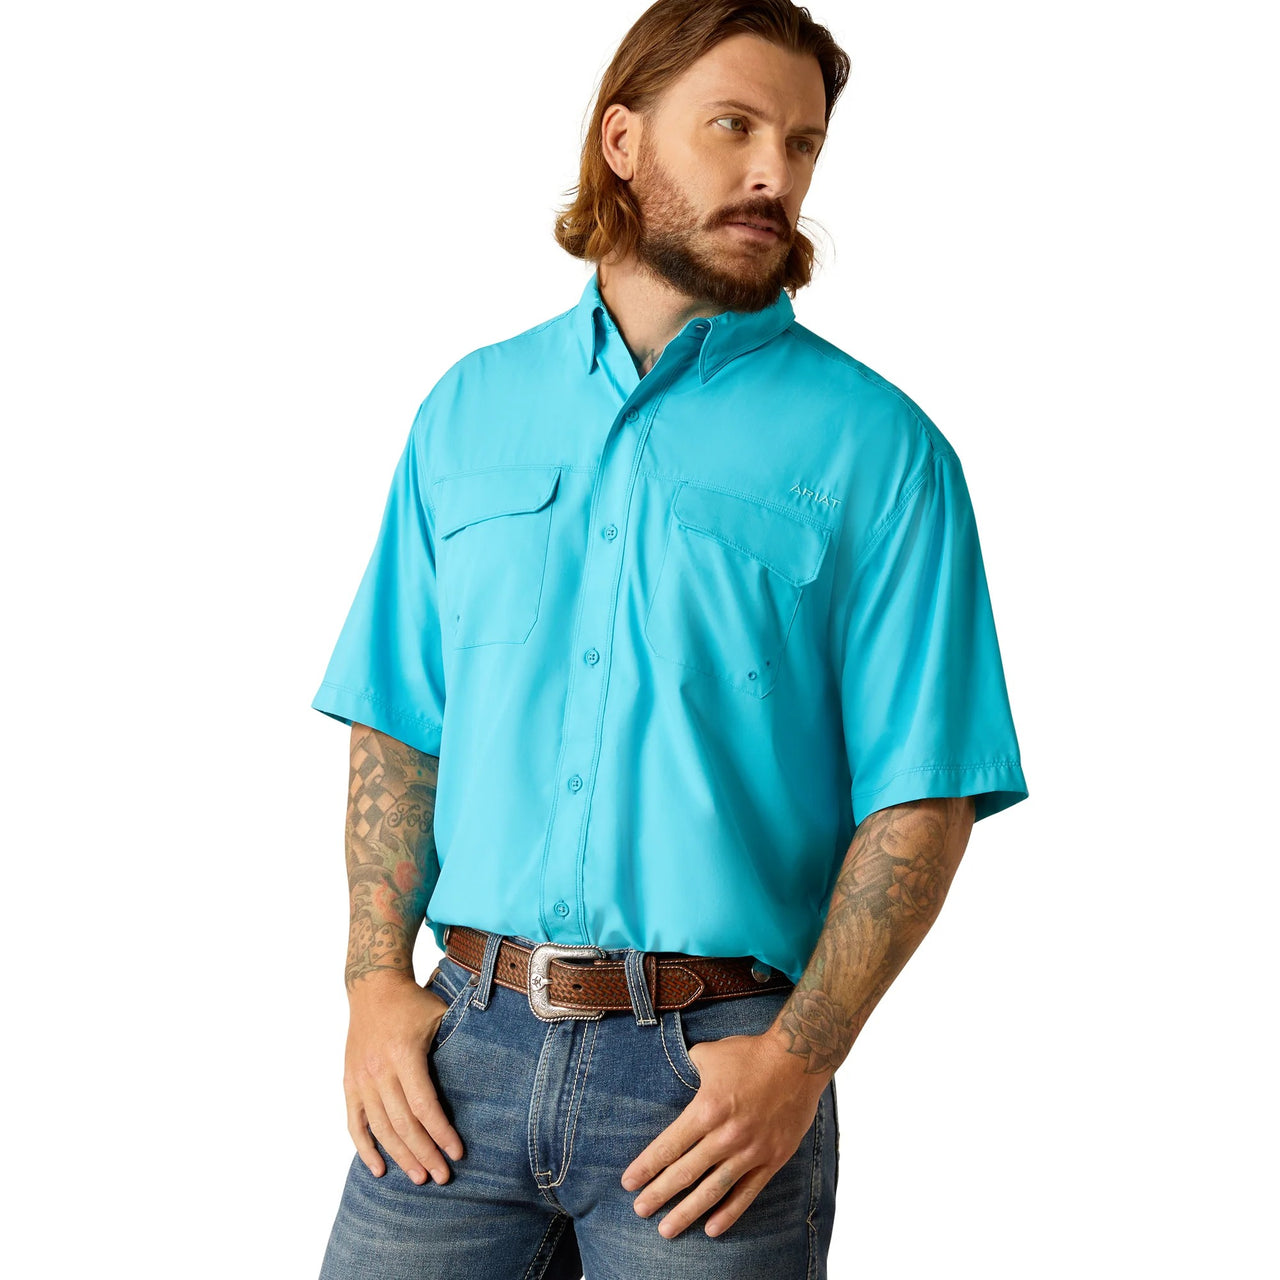 Ariat Men's VentTEK Outbound Classic Fit Short Sleeve Shirt - Turquoise Reef